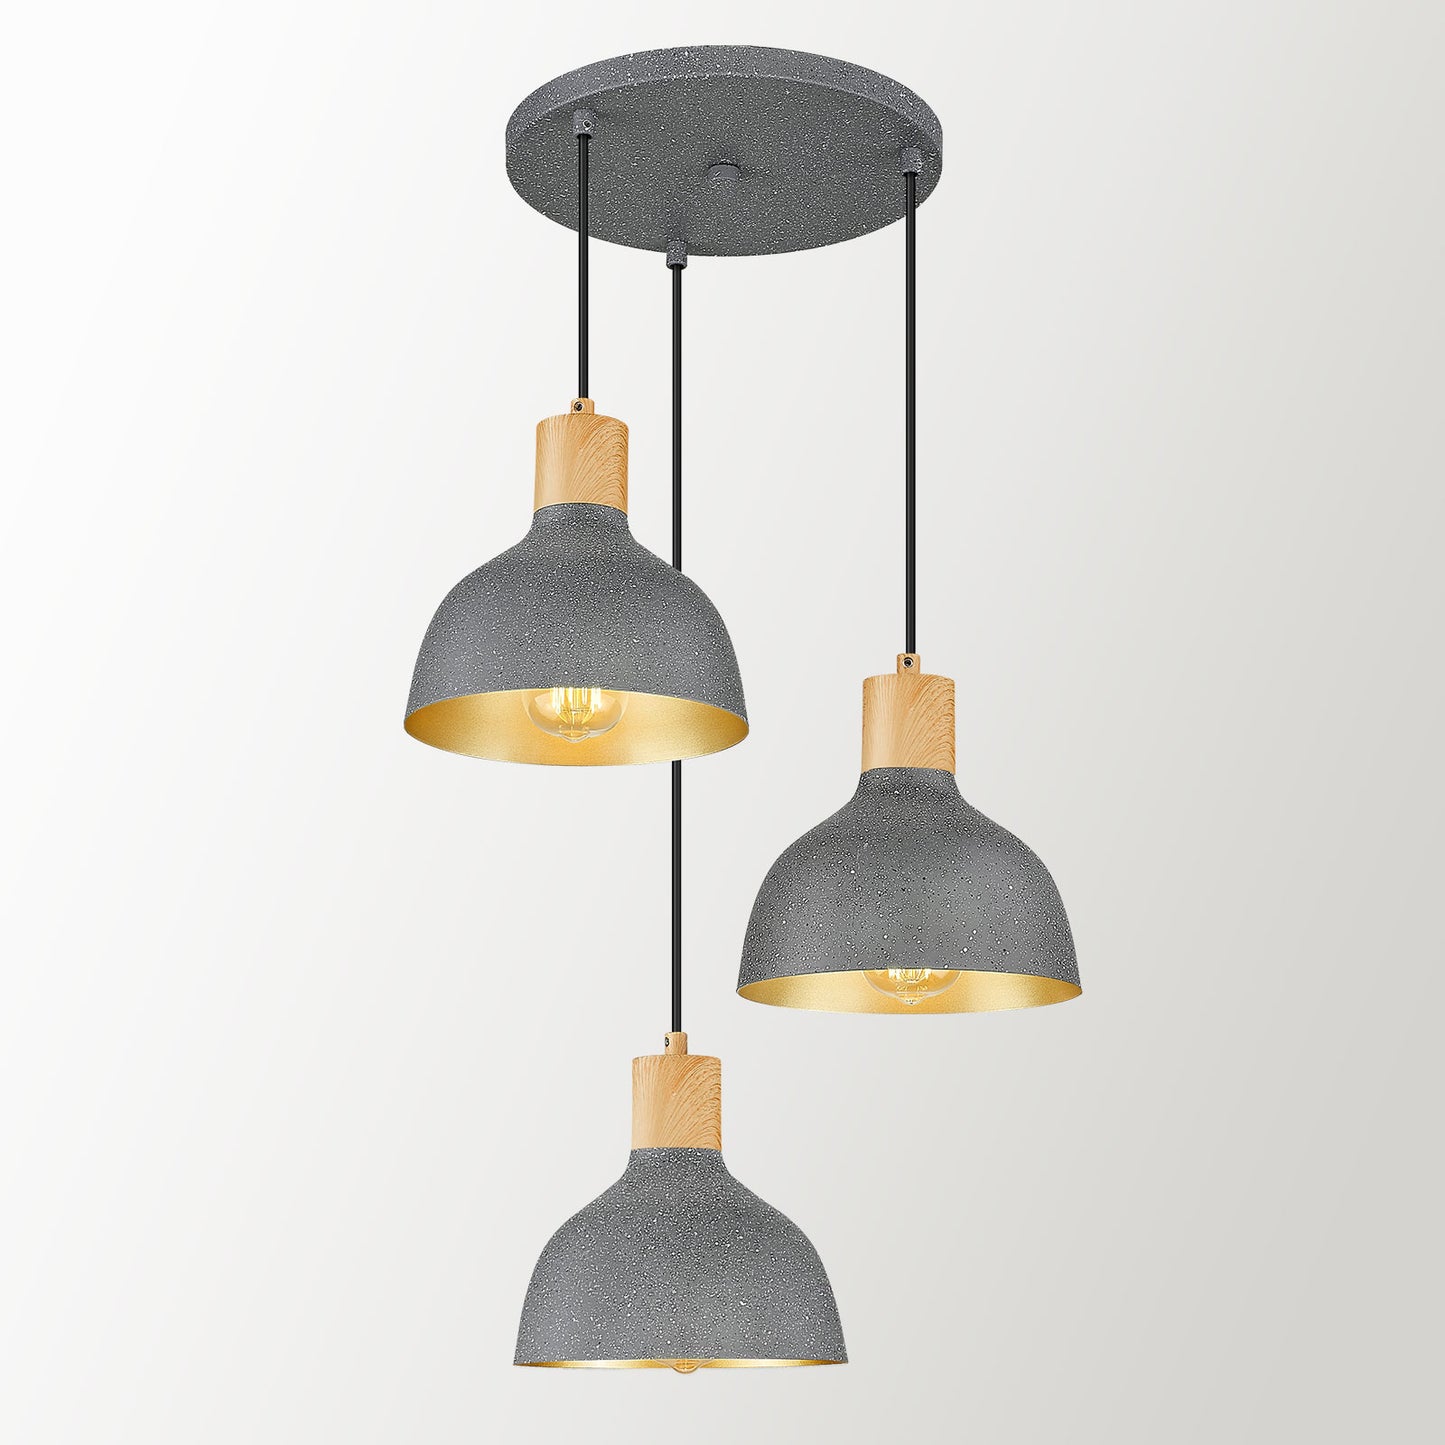 
                  
                    Emliviar 3-Light Cluster Pendant Light, Adjustable Hanging Ceiling Light with Metal Dome Shade for Kitchen Dining Room, Natural Stone Finish, GE273P-3 Grey
                  
                